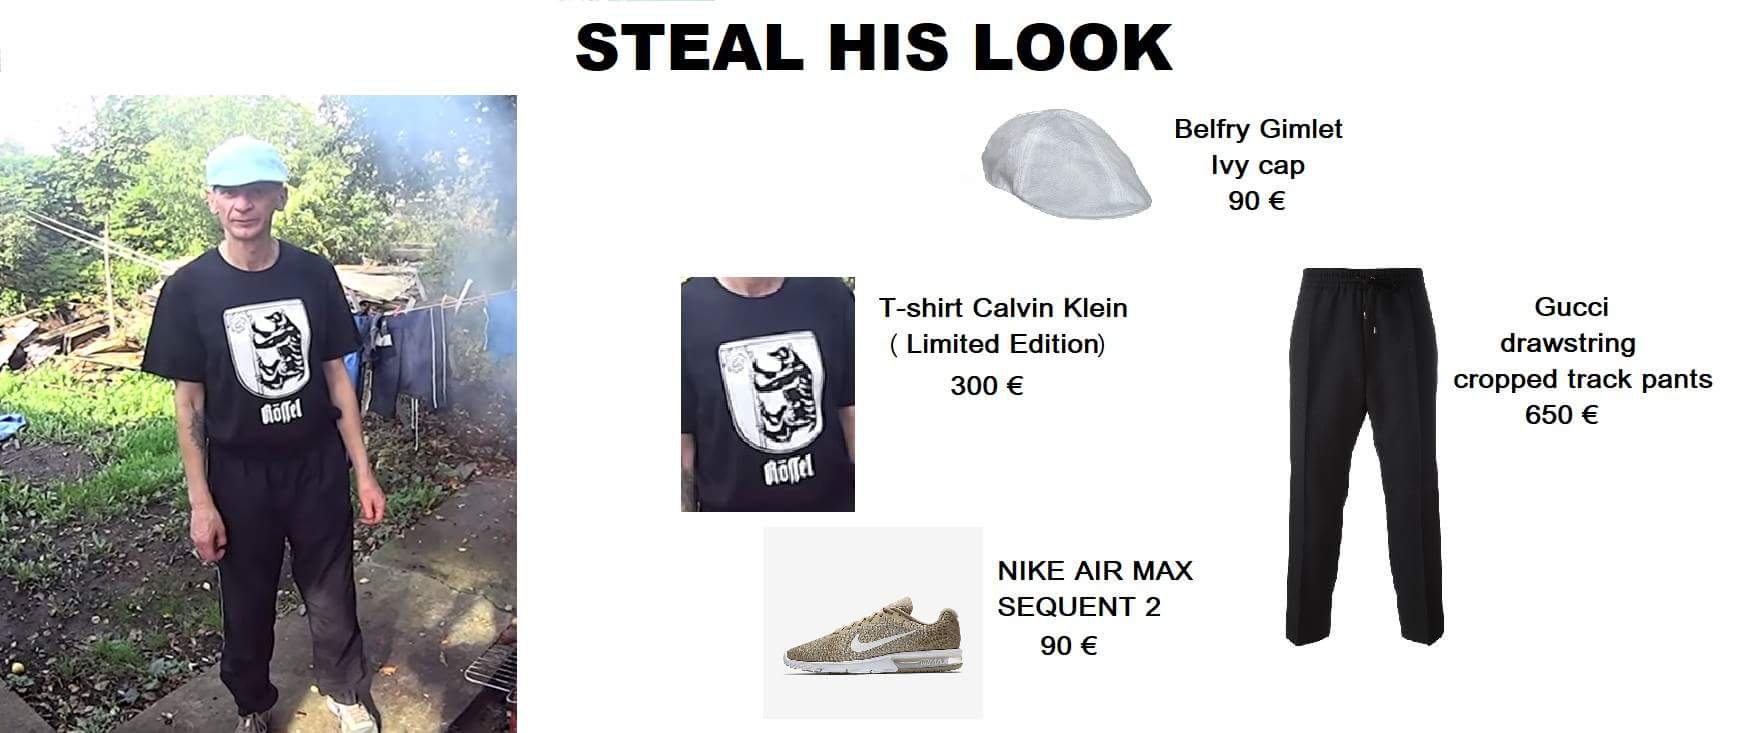 His look was quite alarming a lasting. Steal the look. Лукашенко steal his look. Steal this look. Steal his look КРАЗ.